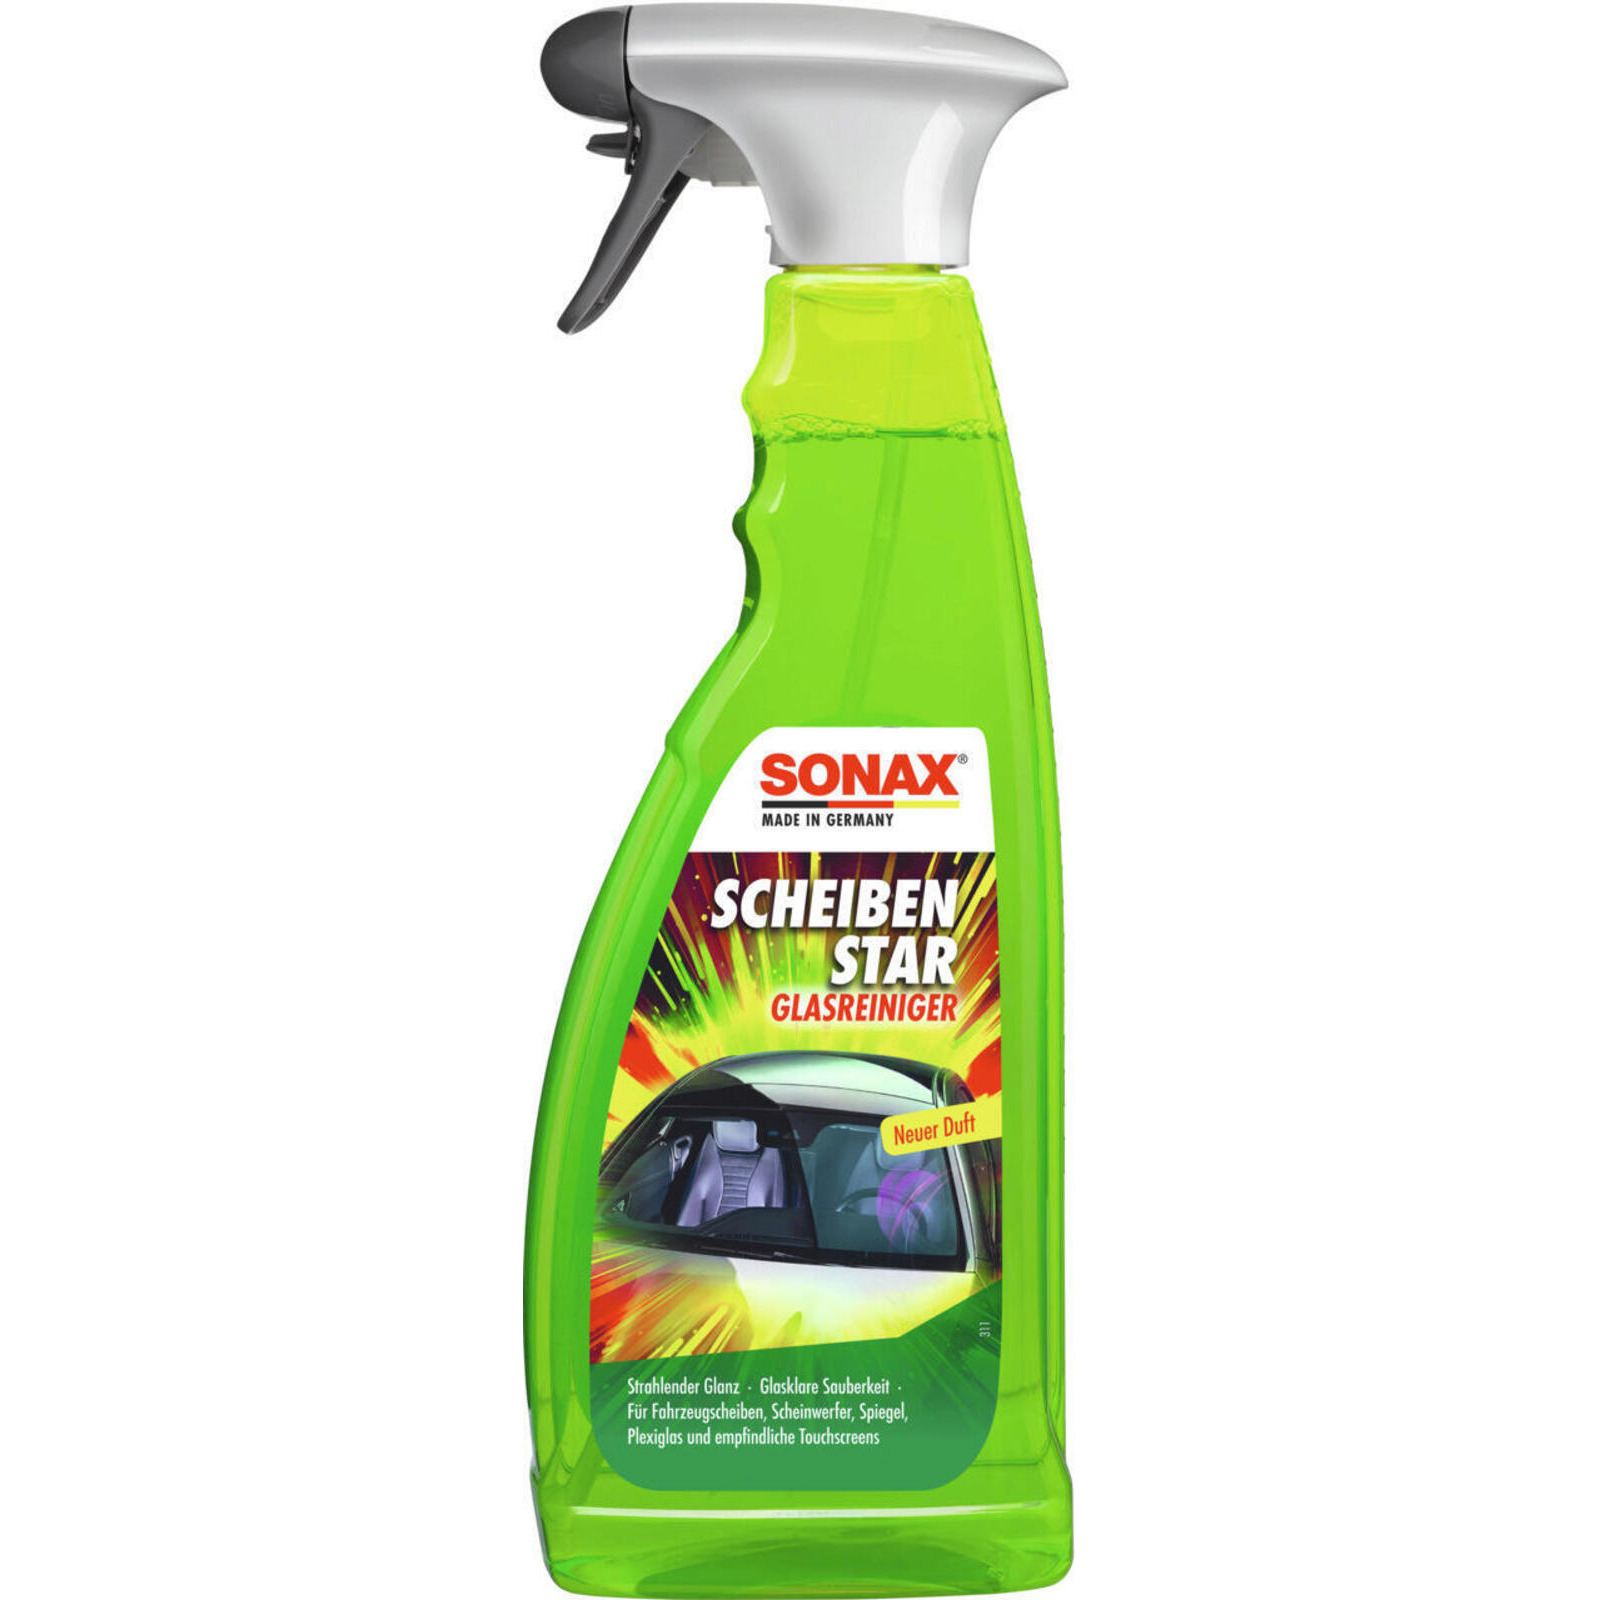 SONAX Window Cleaner Glass cleaning star